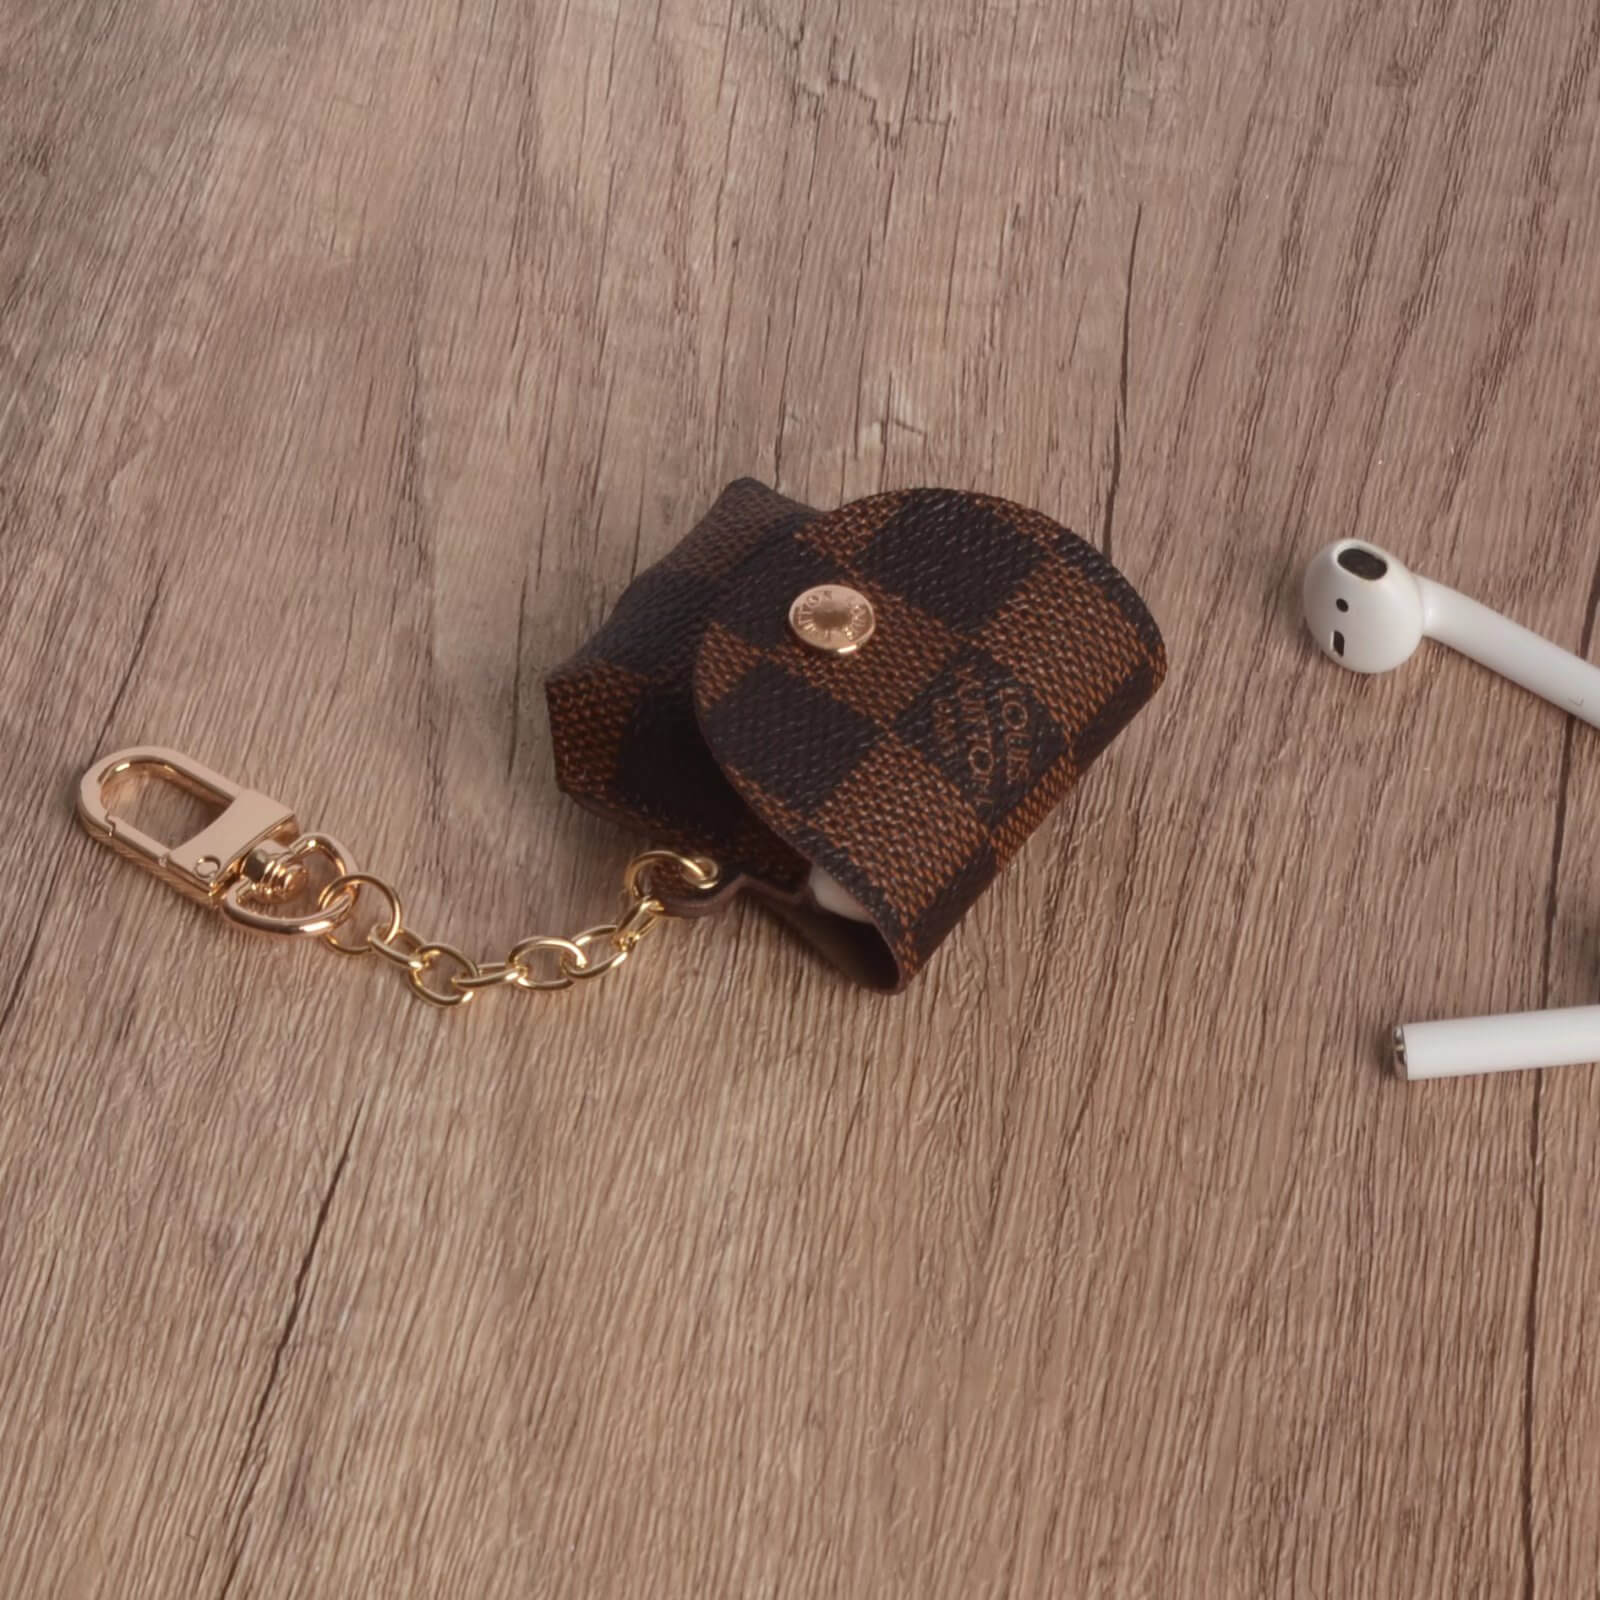 Louis Vuitton Protection Cover Case For Apple Airpods Pro Airpods 1 2 -6